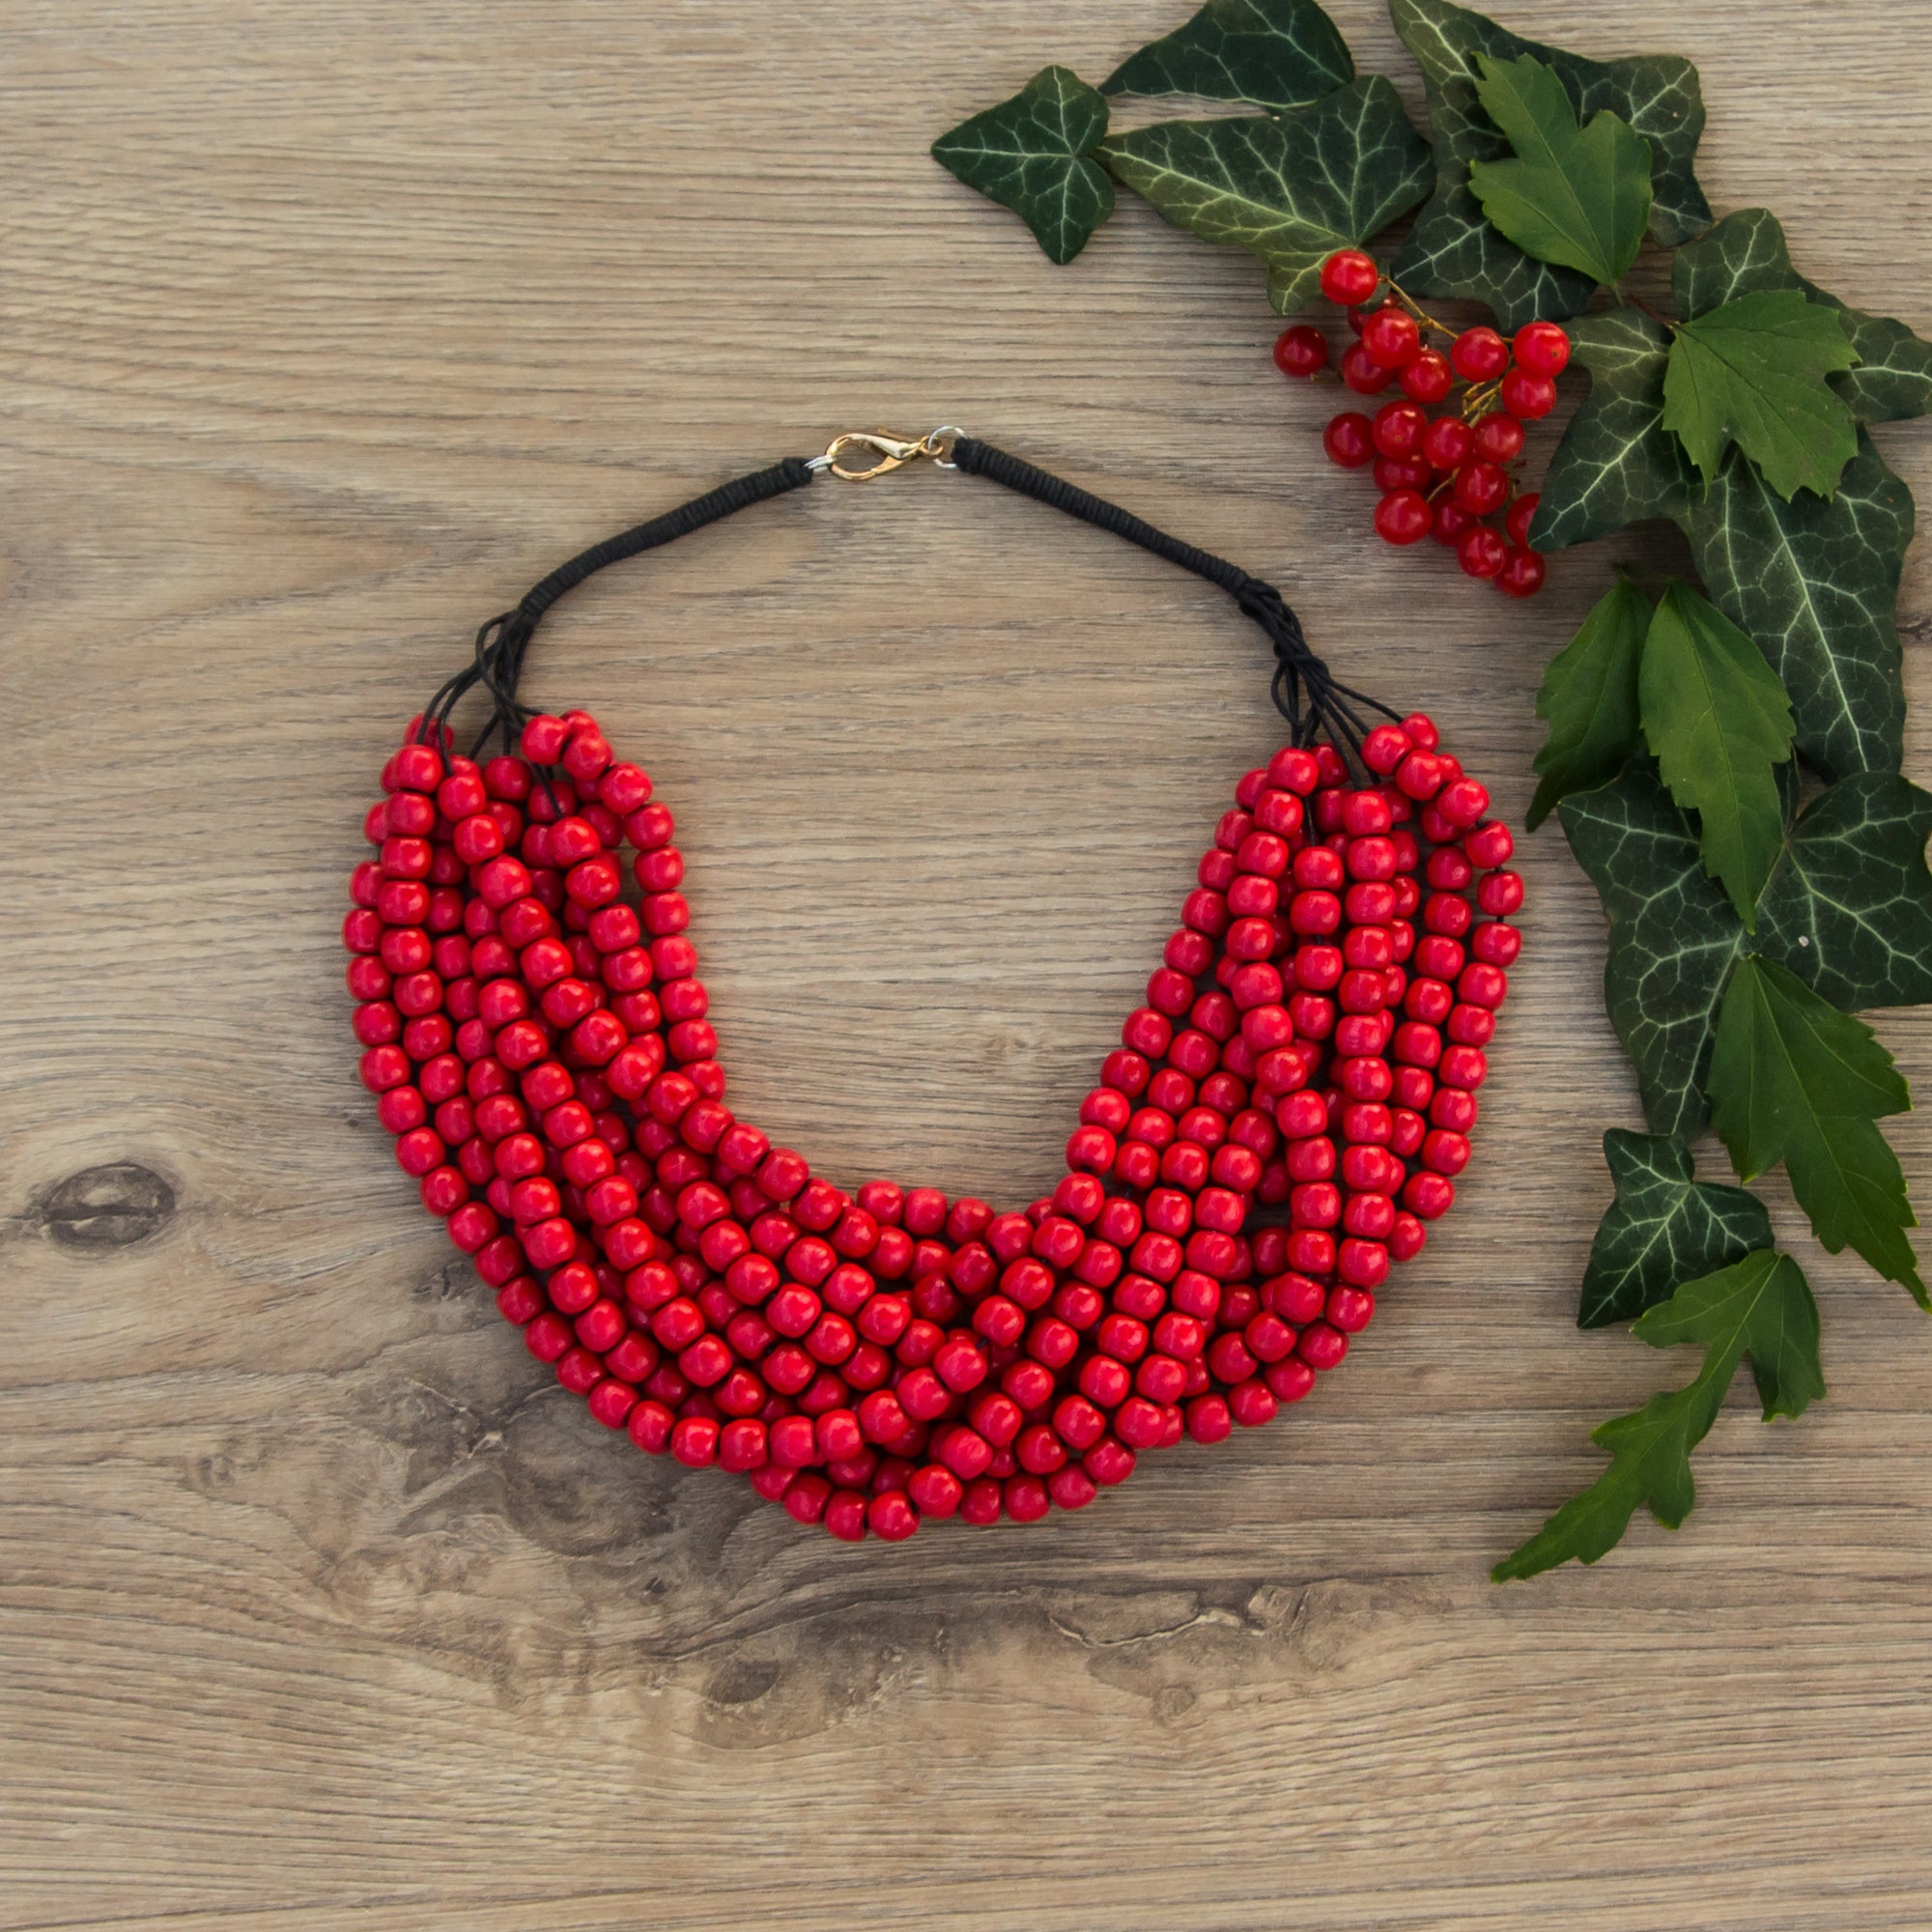 Wood Beads Necklace Red 💗 8mm Handmade Jewelry – WorldOfNecklaces